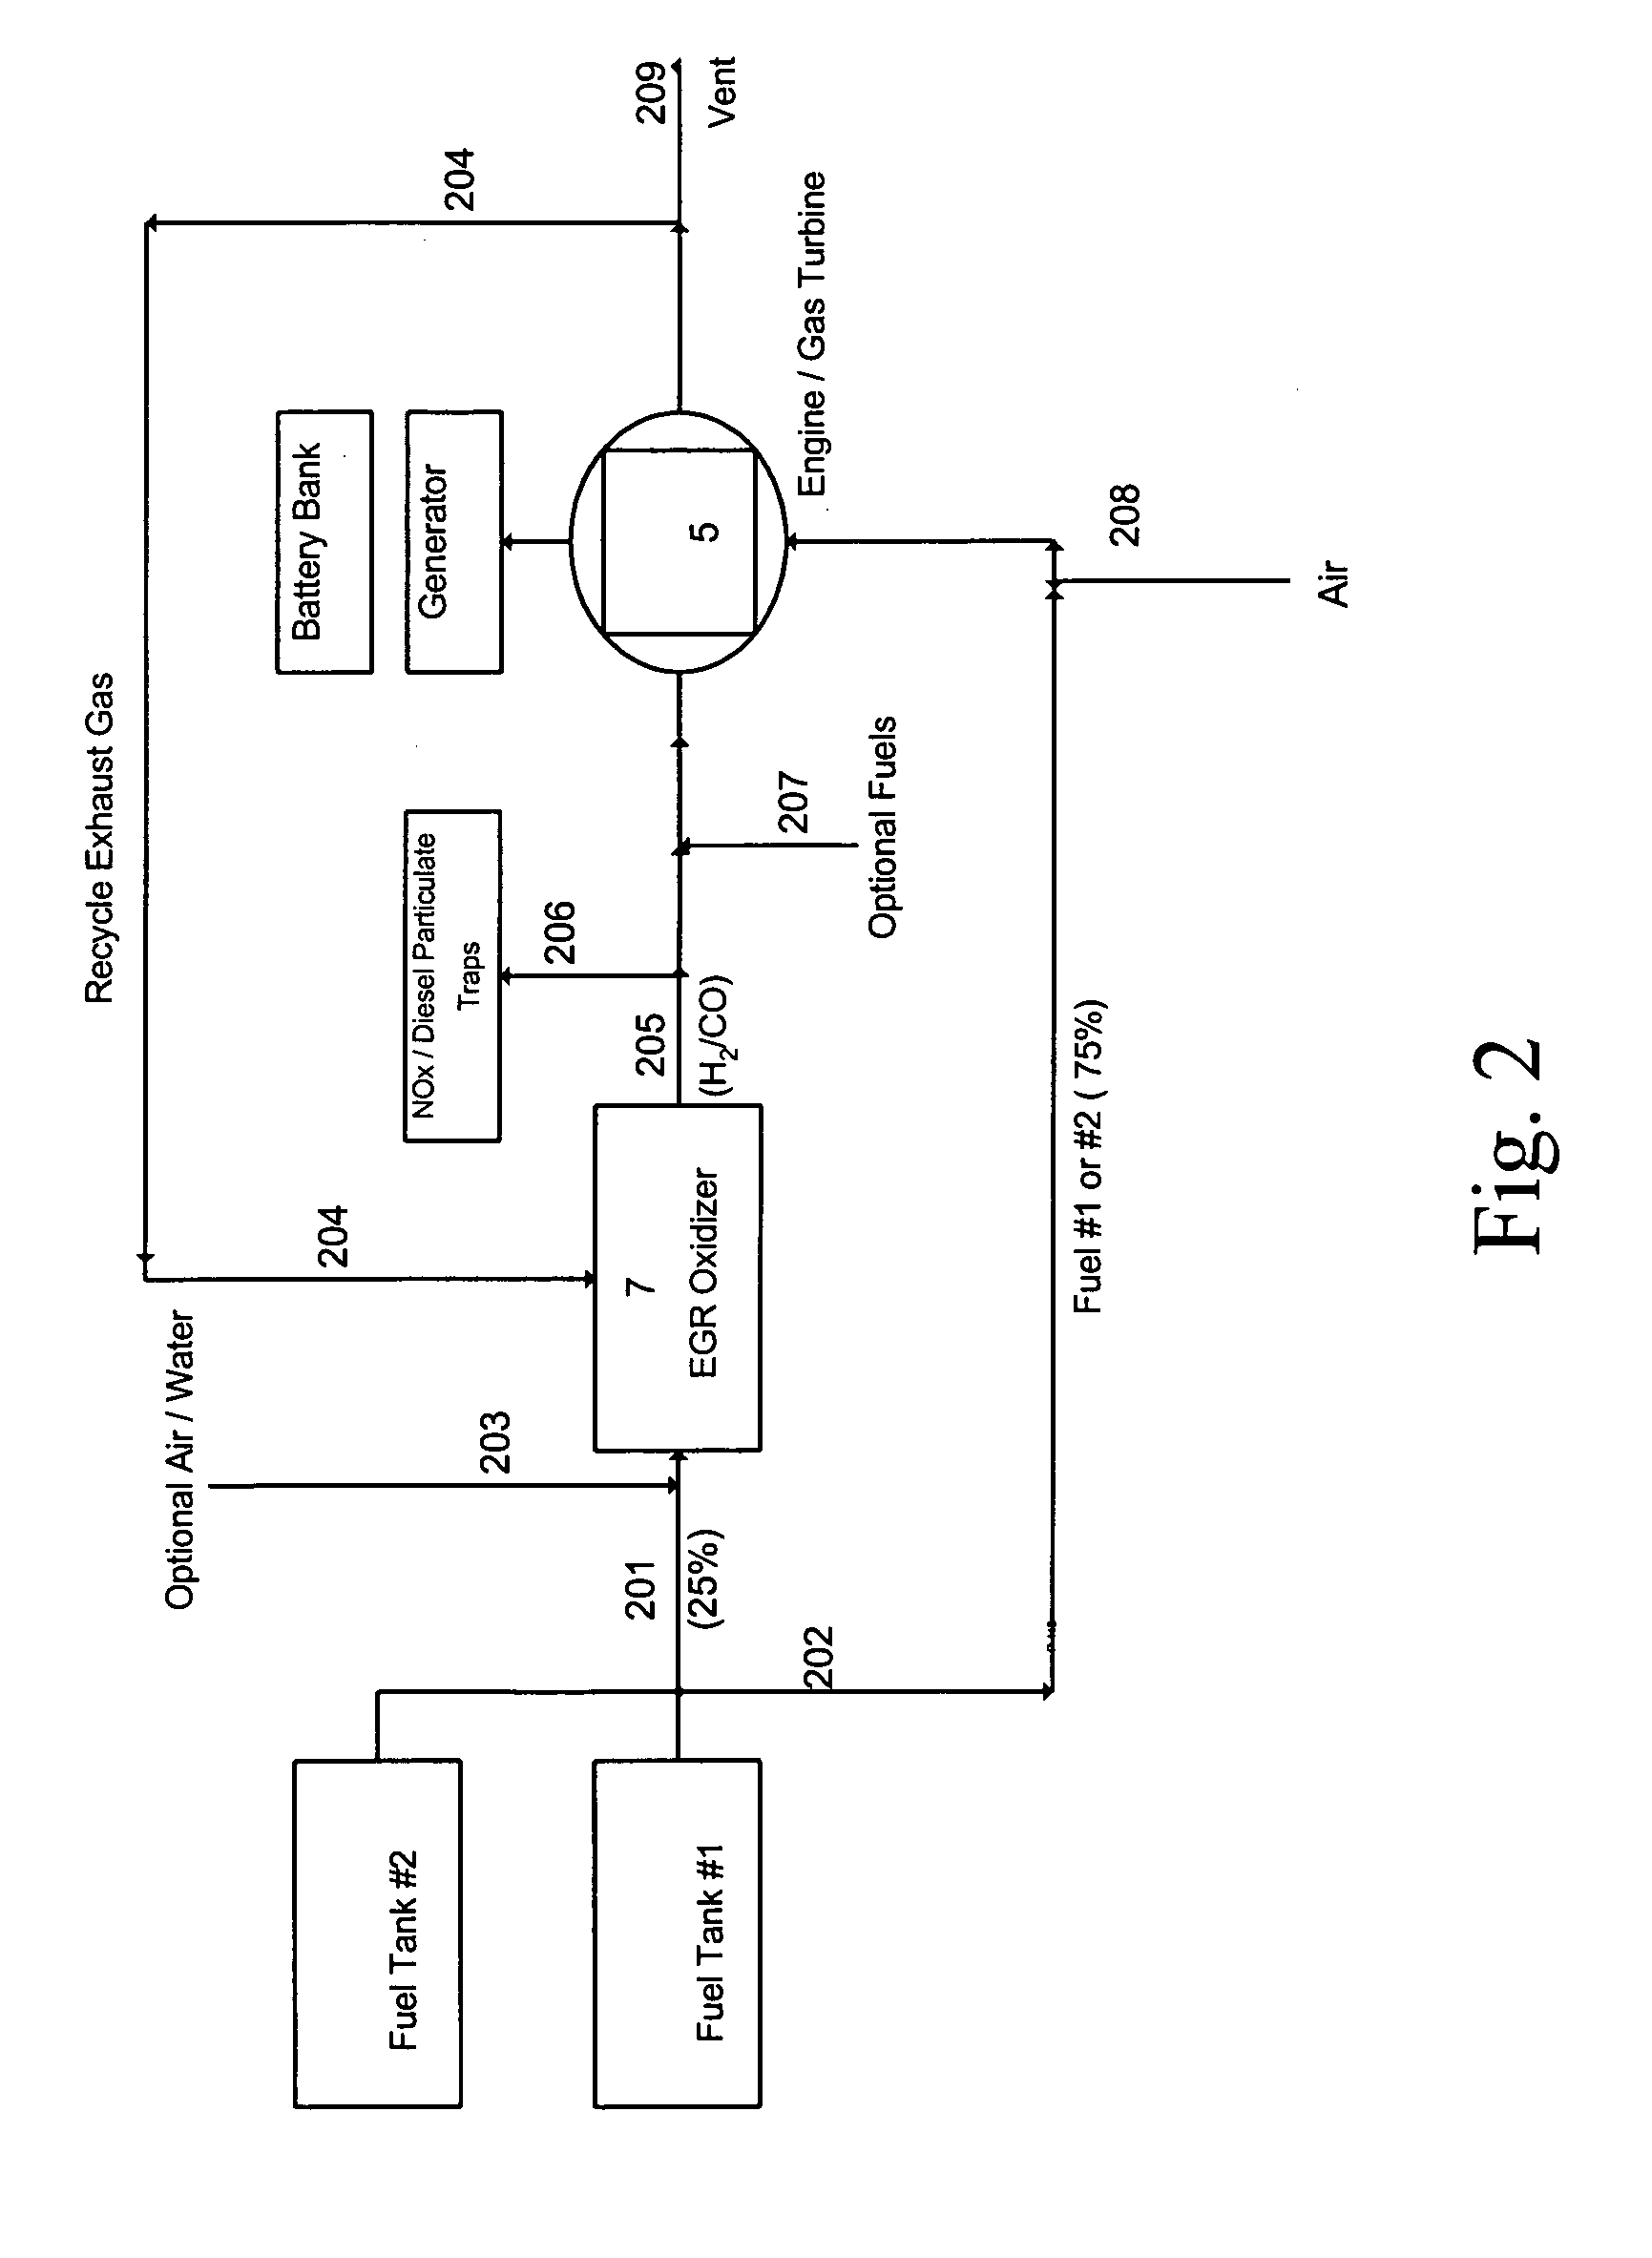 Catalytic EGR oxidizer for IC engines and gas turbines